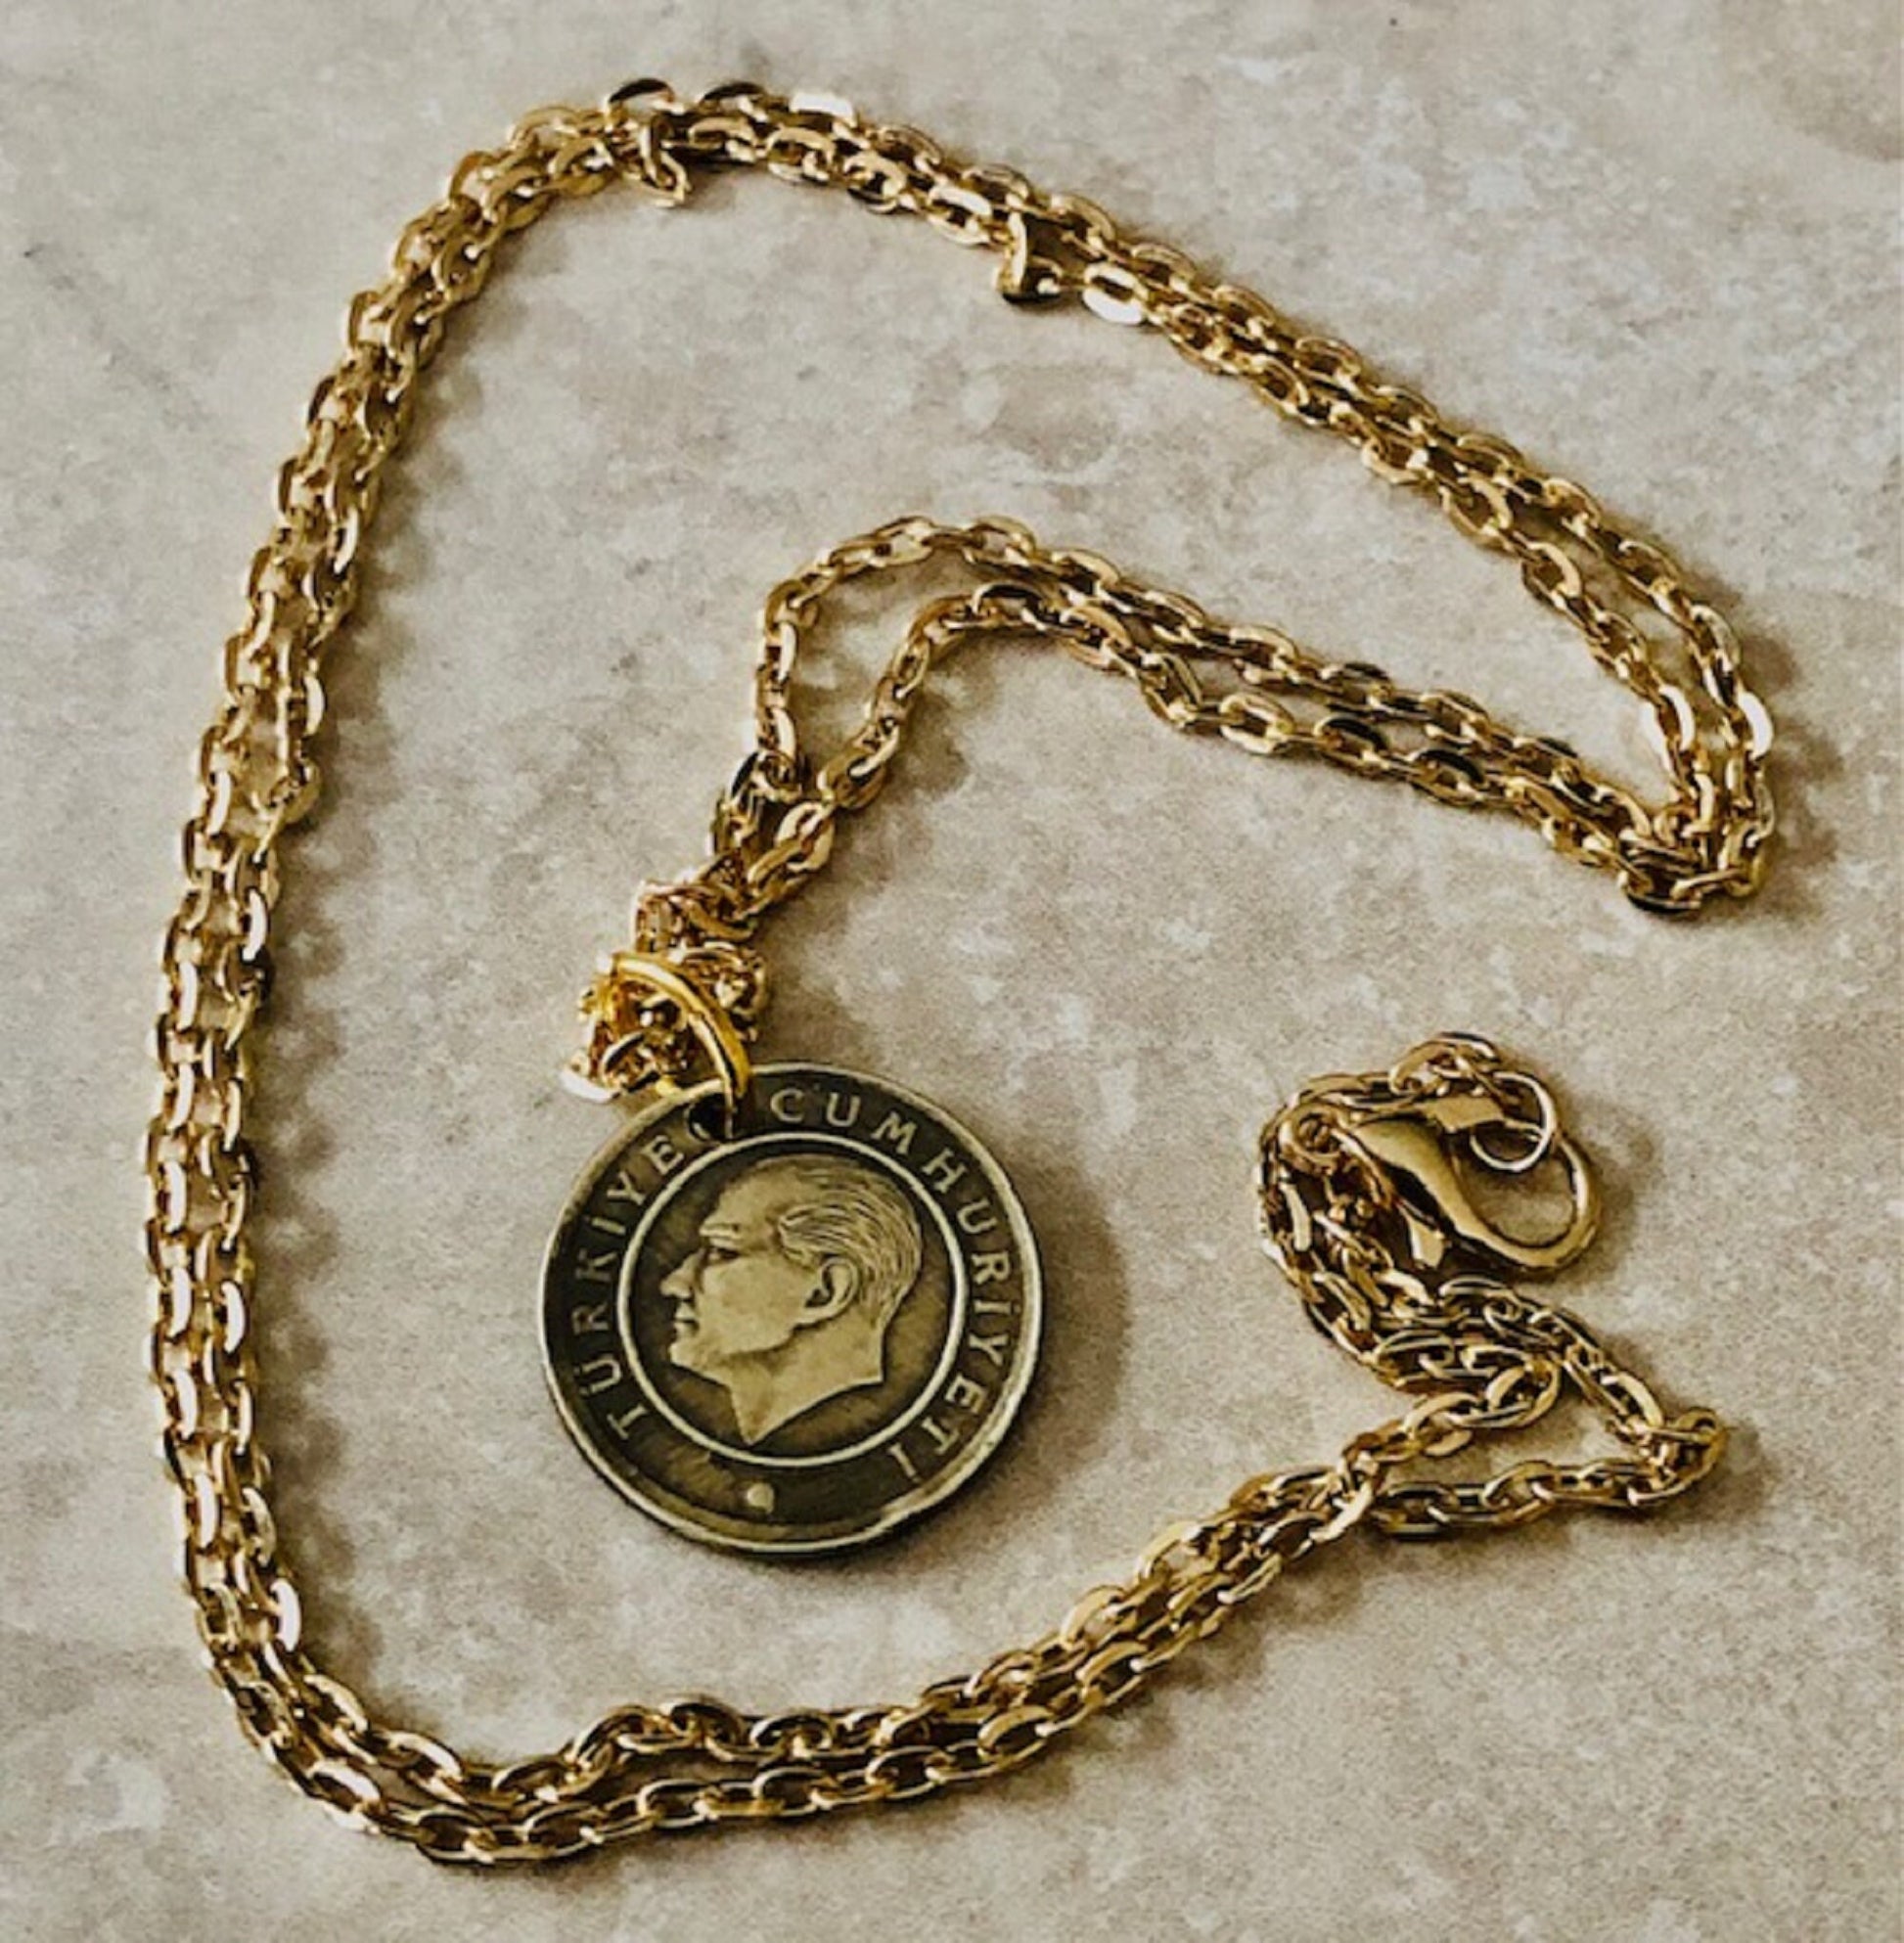 Turkey Coin Necklace Turkish 10 Kurus Pendant Personal Old Vintage Handmade Jewelry Gift Friend Charm For Him Her World Coin Collector